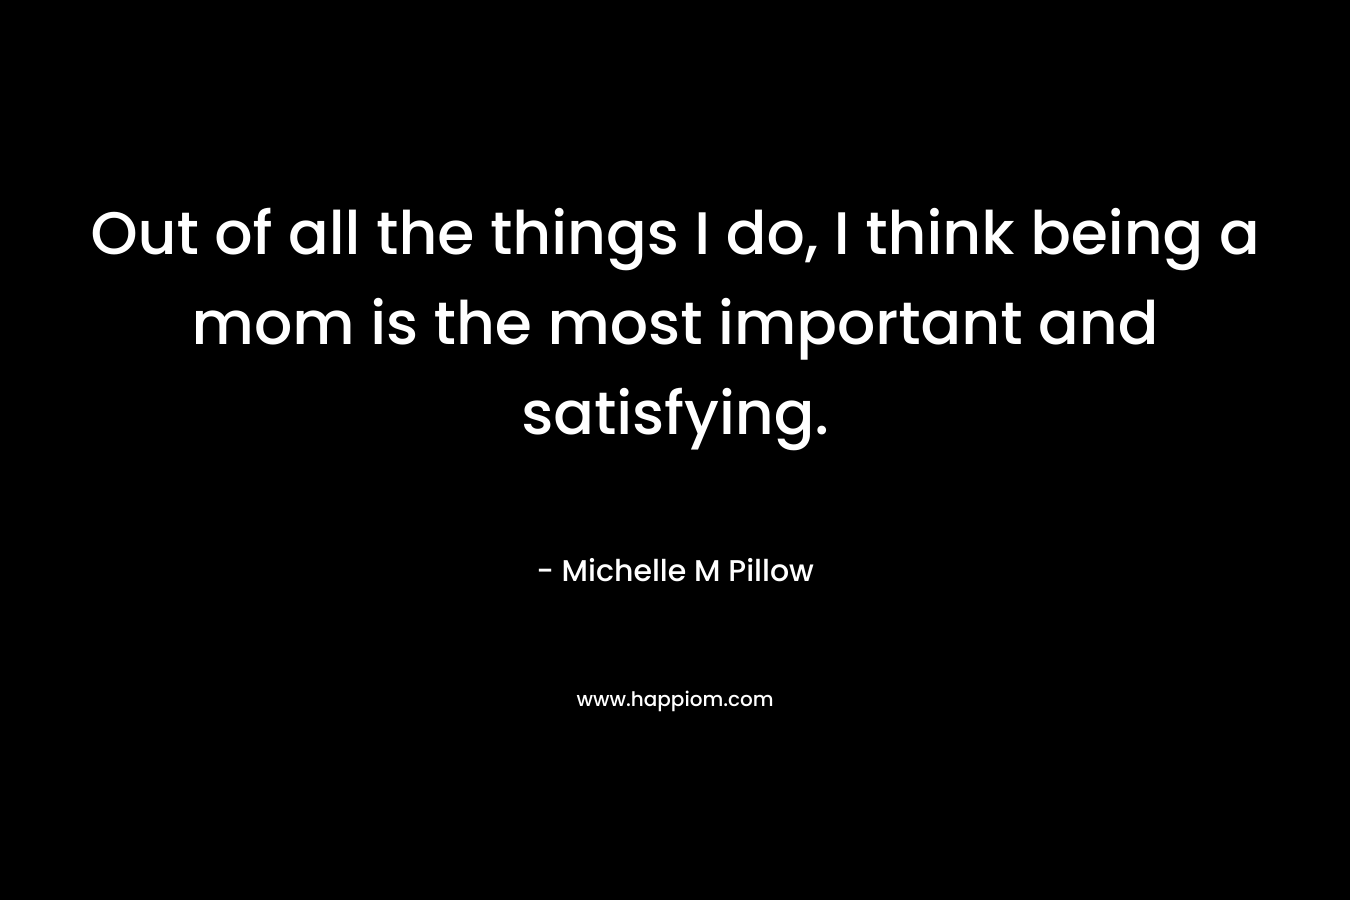 Out of all the things I do, I think being a mom is the most important and satisfying.